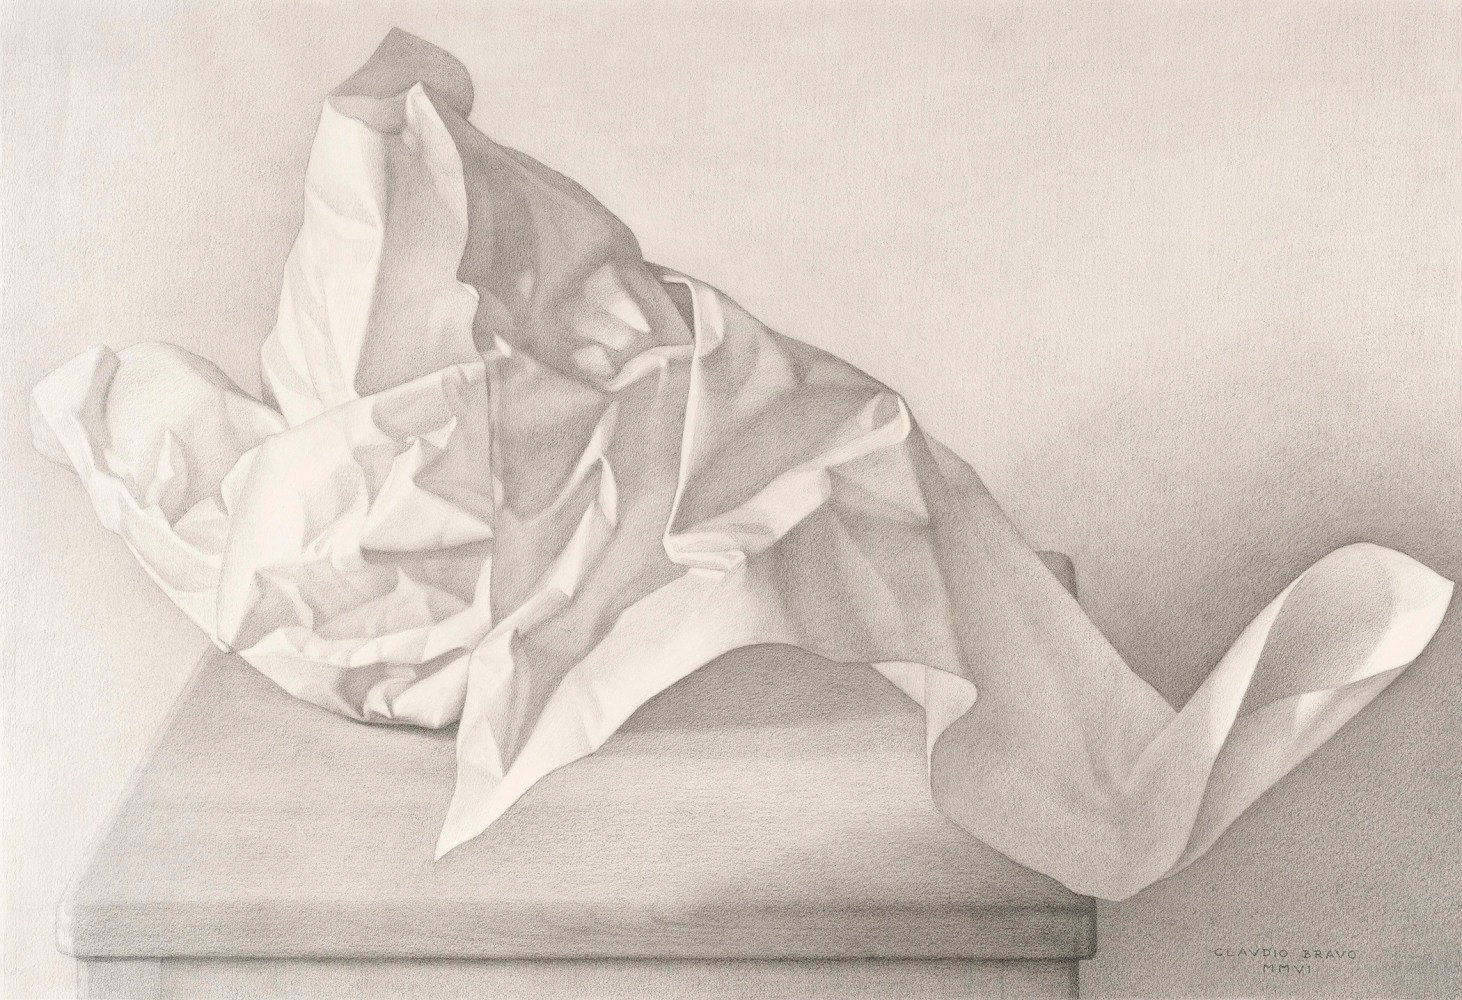 Pencil sketch of crumpled white paper.